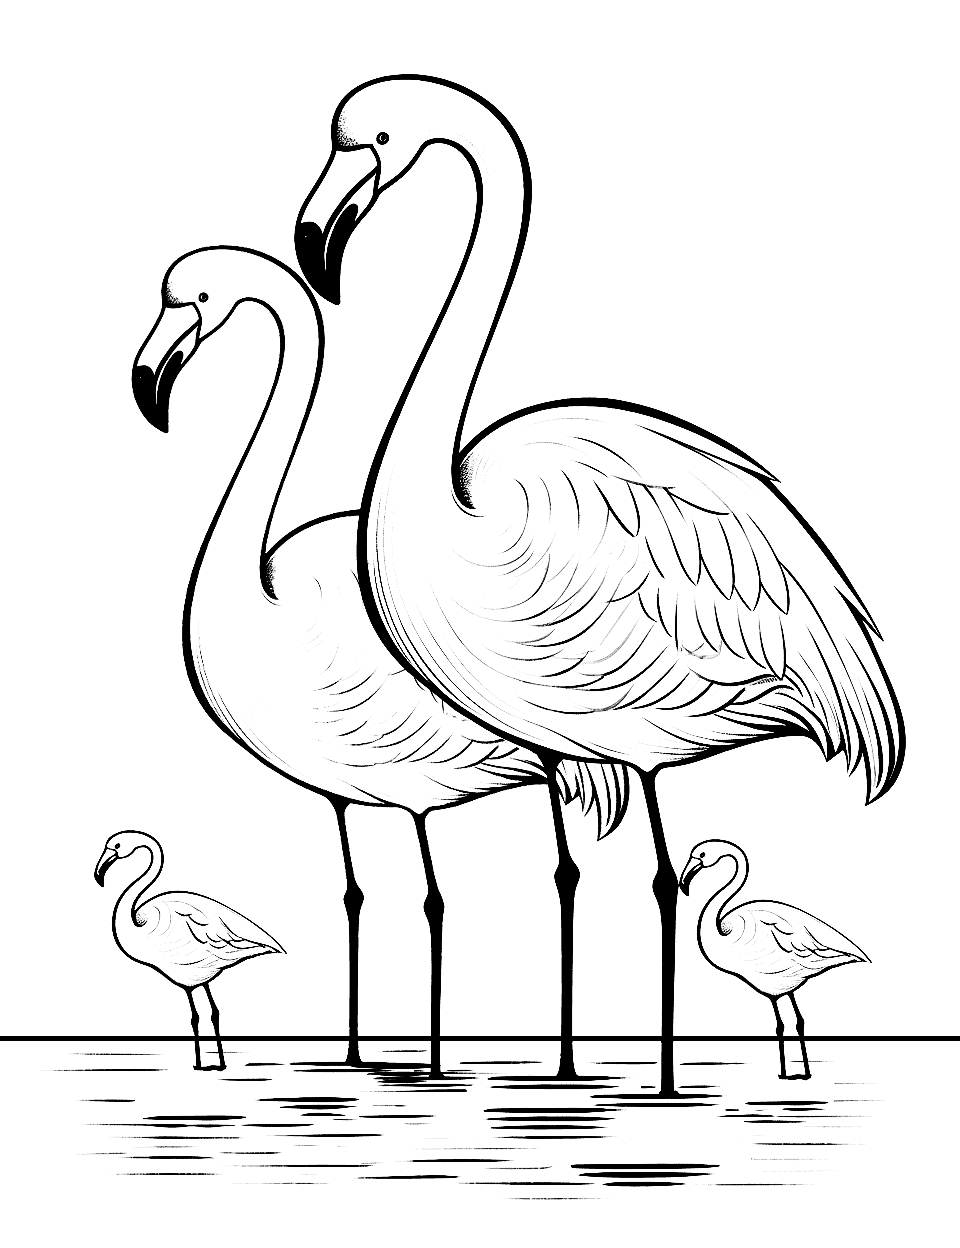 Flamingo Family Outing Coloring Page - A heartwarming scene showing a family of flamingos, with both parents and chicks, strolling together.